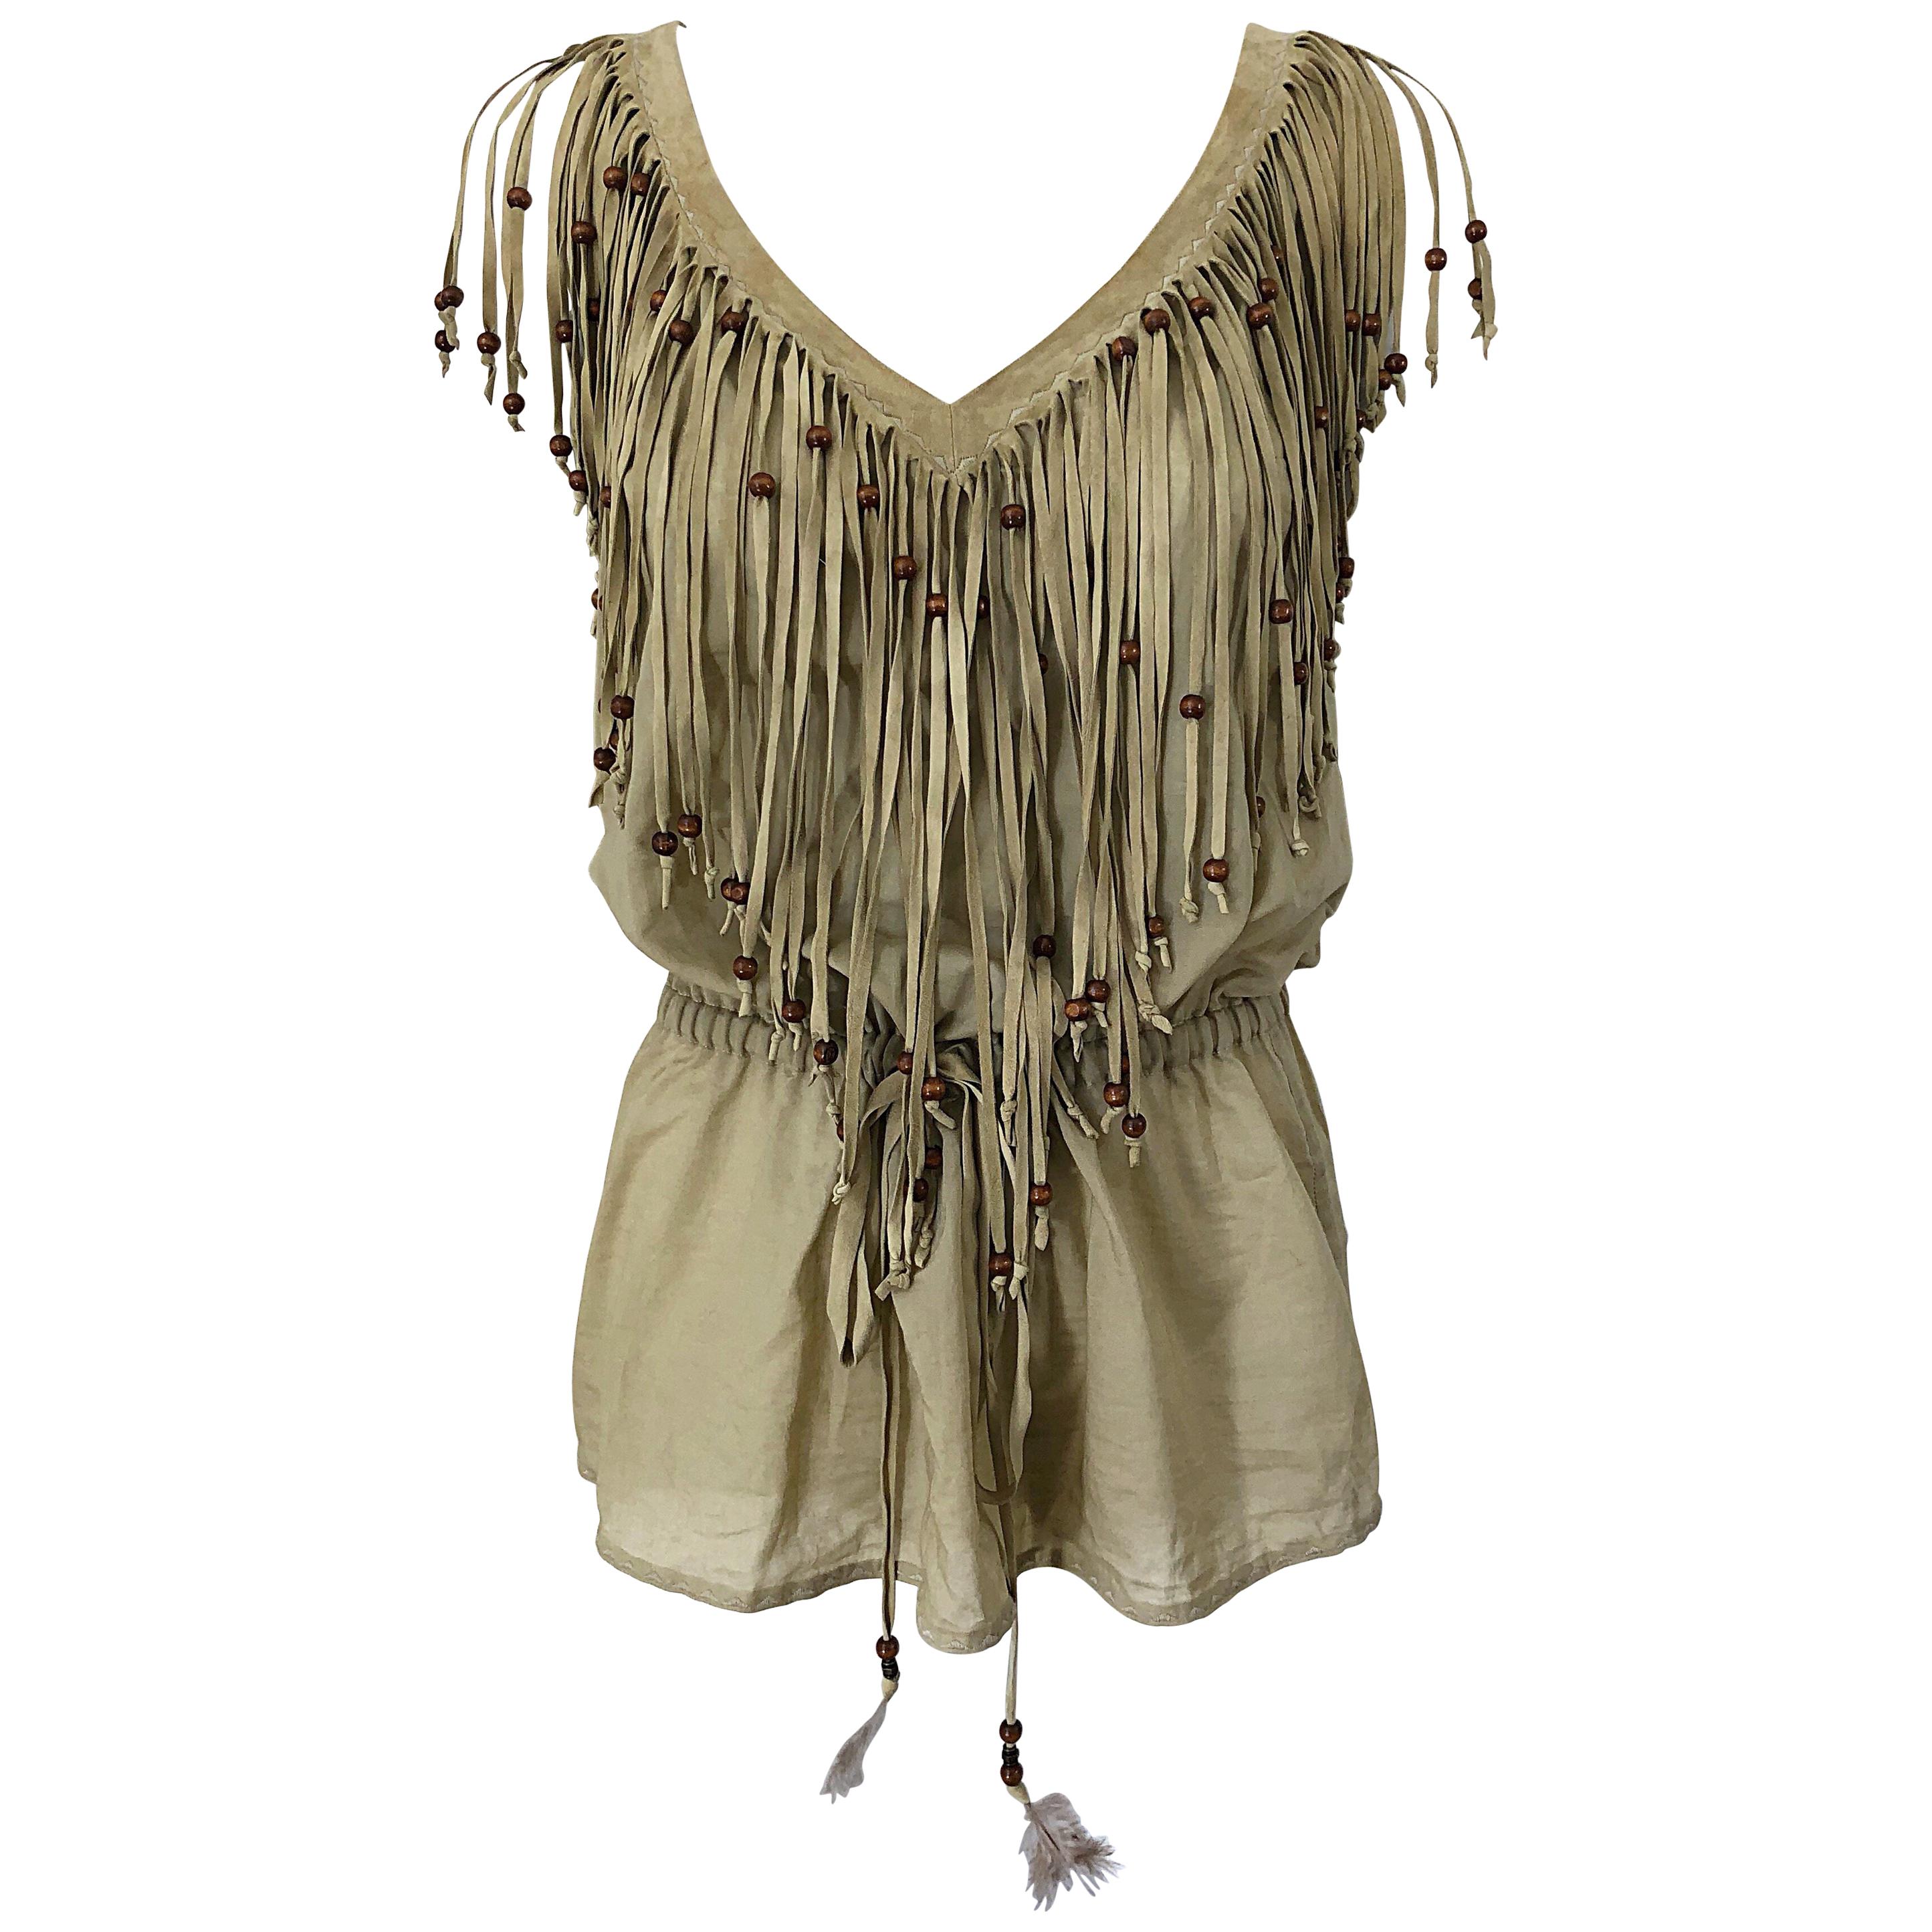 1990s Dolce & Gabbana Khaki / Brown Cotton and Suede Feathers Beaded Boho Blouse